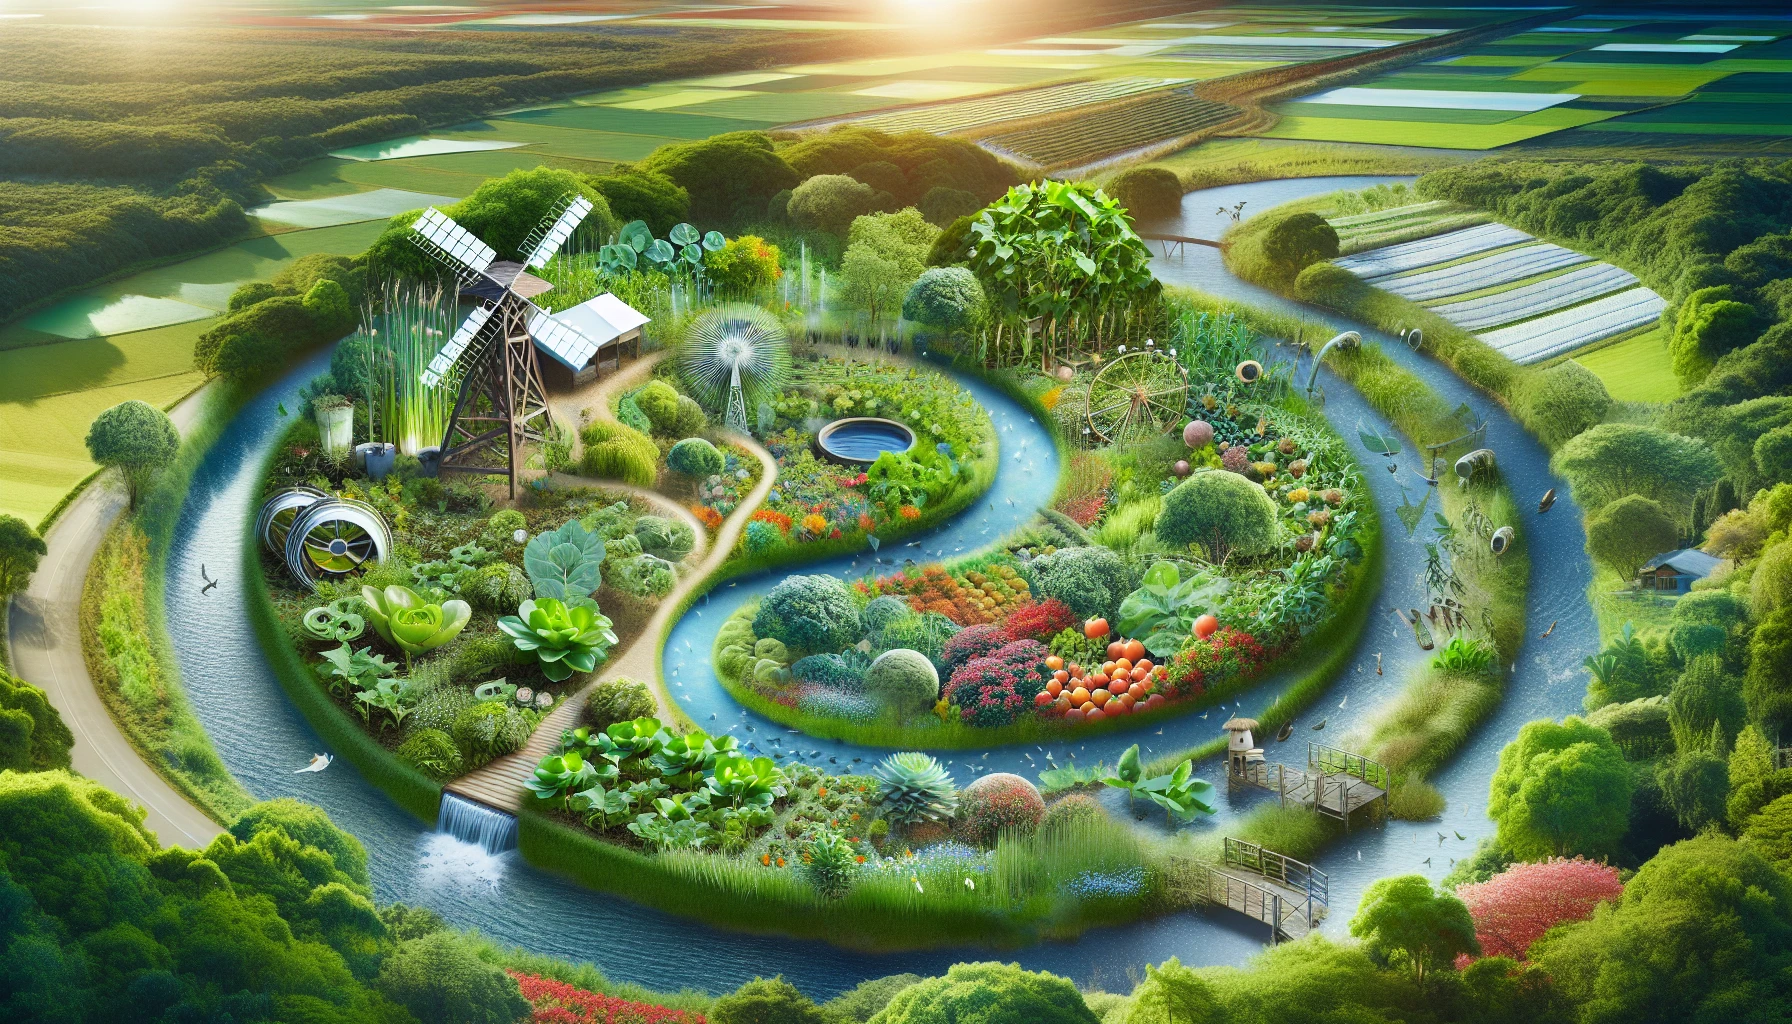 Illustration of diverse sustainable systems in permaculture design